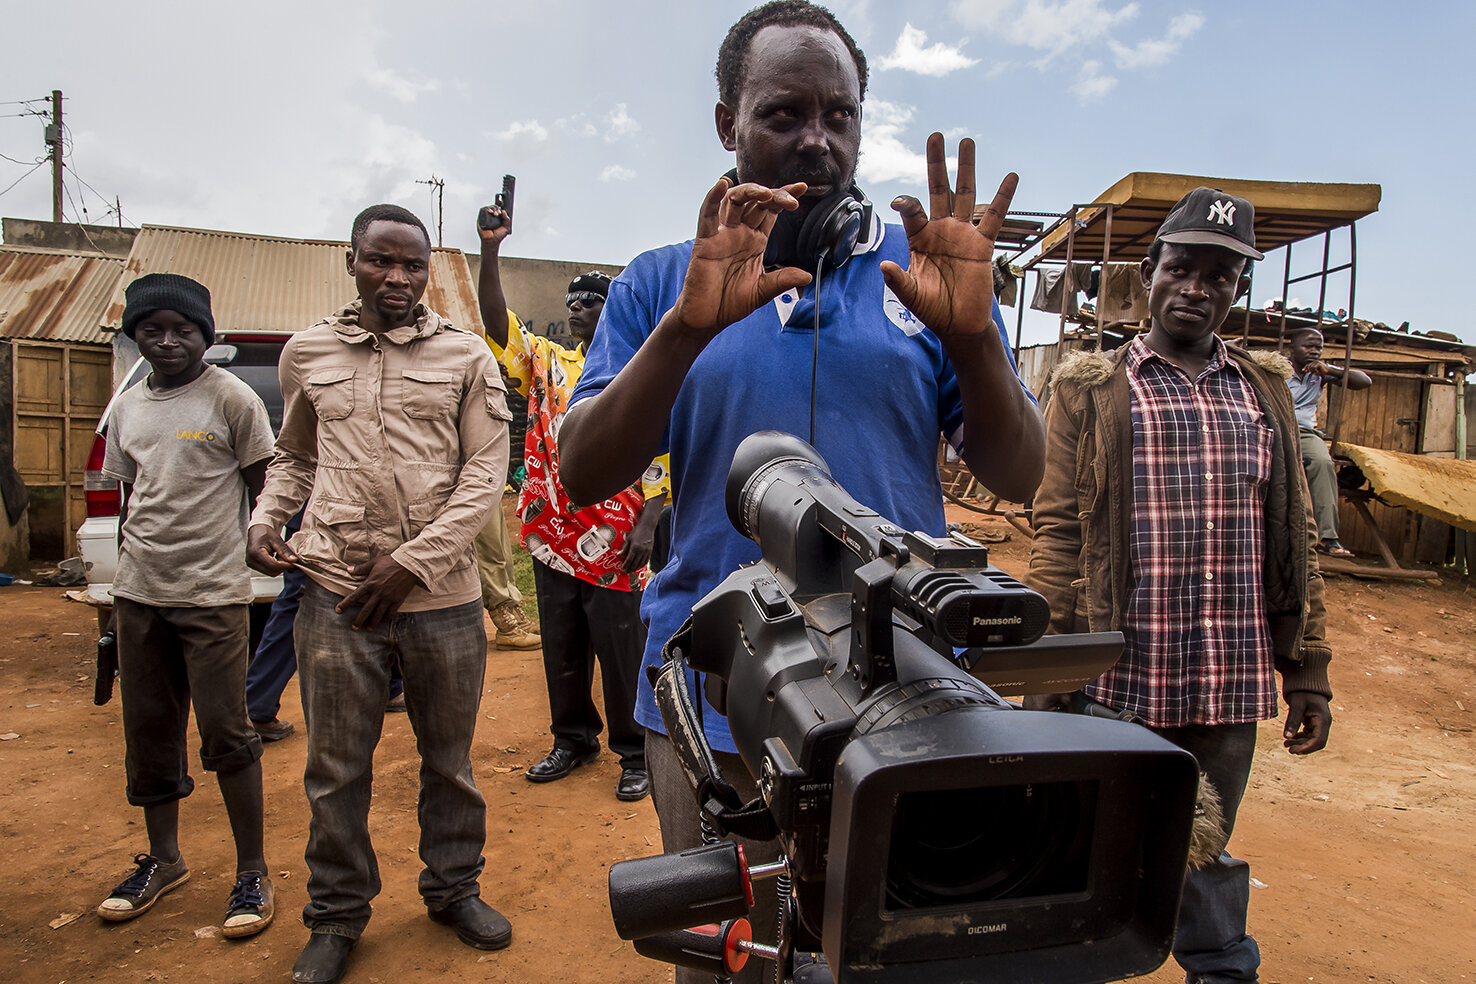  In Ramon Studio, a family compound in Wakaliga slum, Isaac Nabwana, the director of Wakaliwood, looks for the frame of the next shot while his actors look on. 